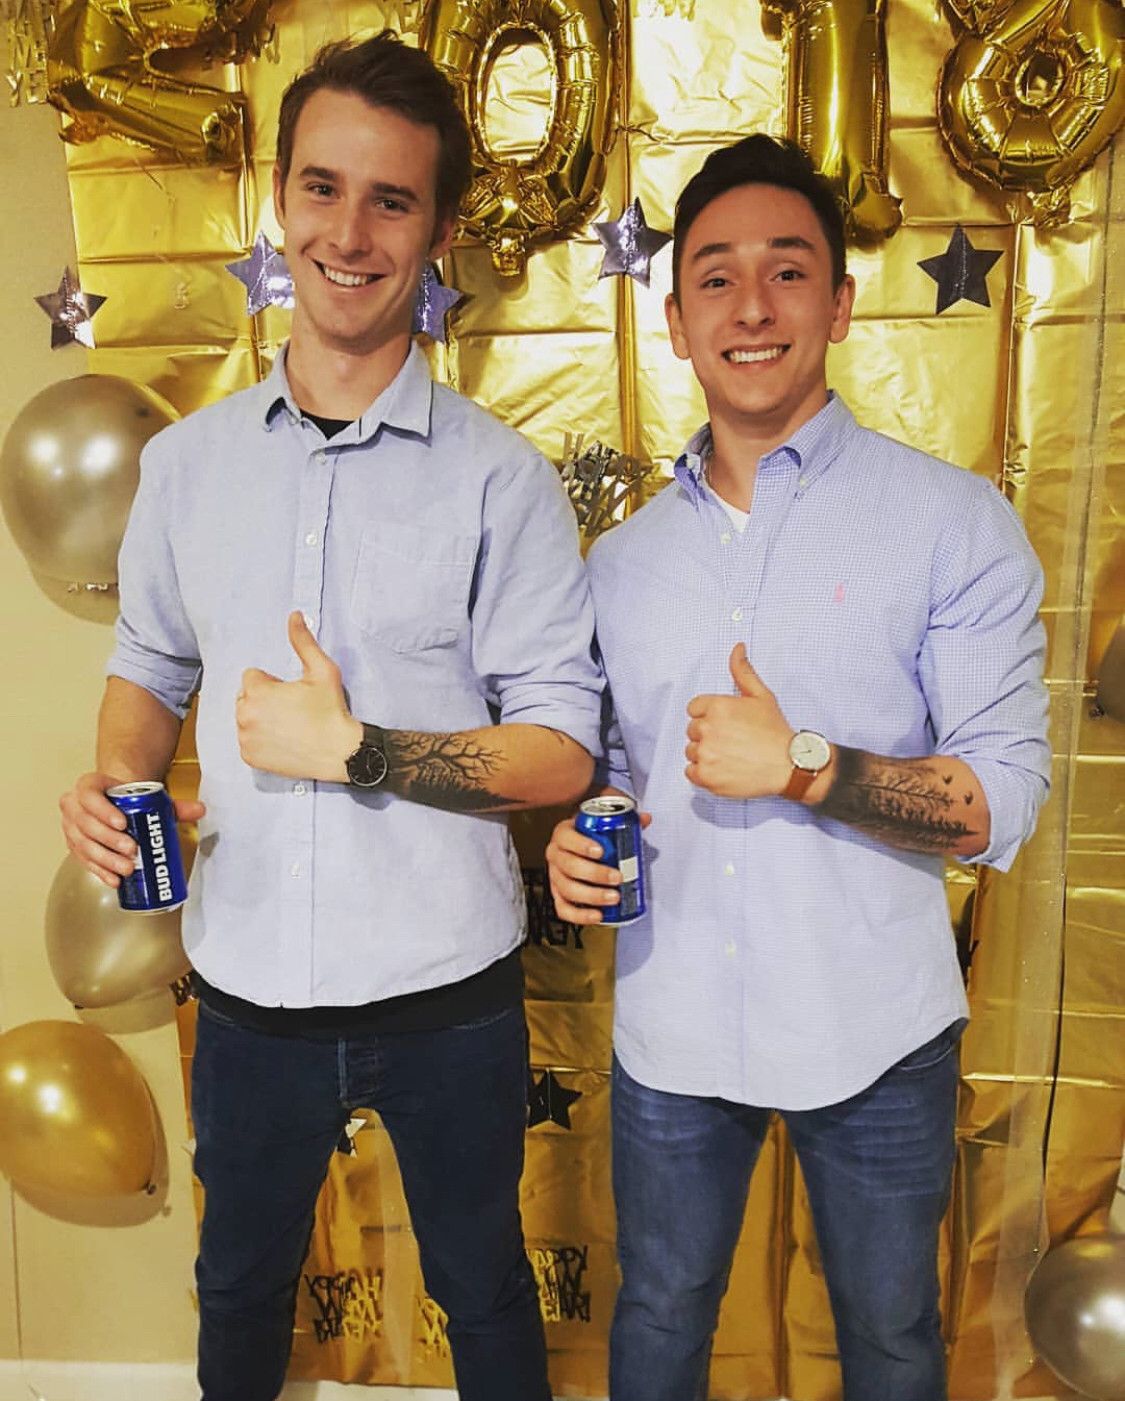 Buddy showed up to a NYE wearing the same thing as a stranger who had the same exact tattoo.